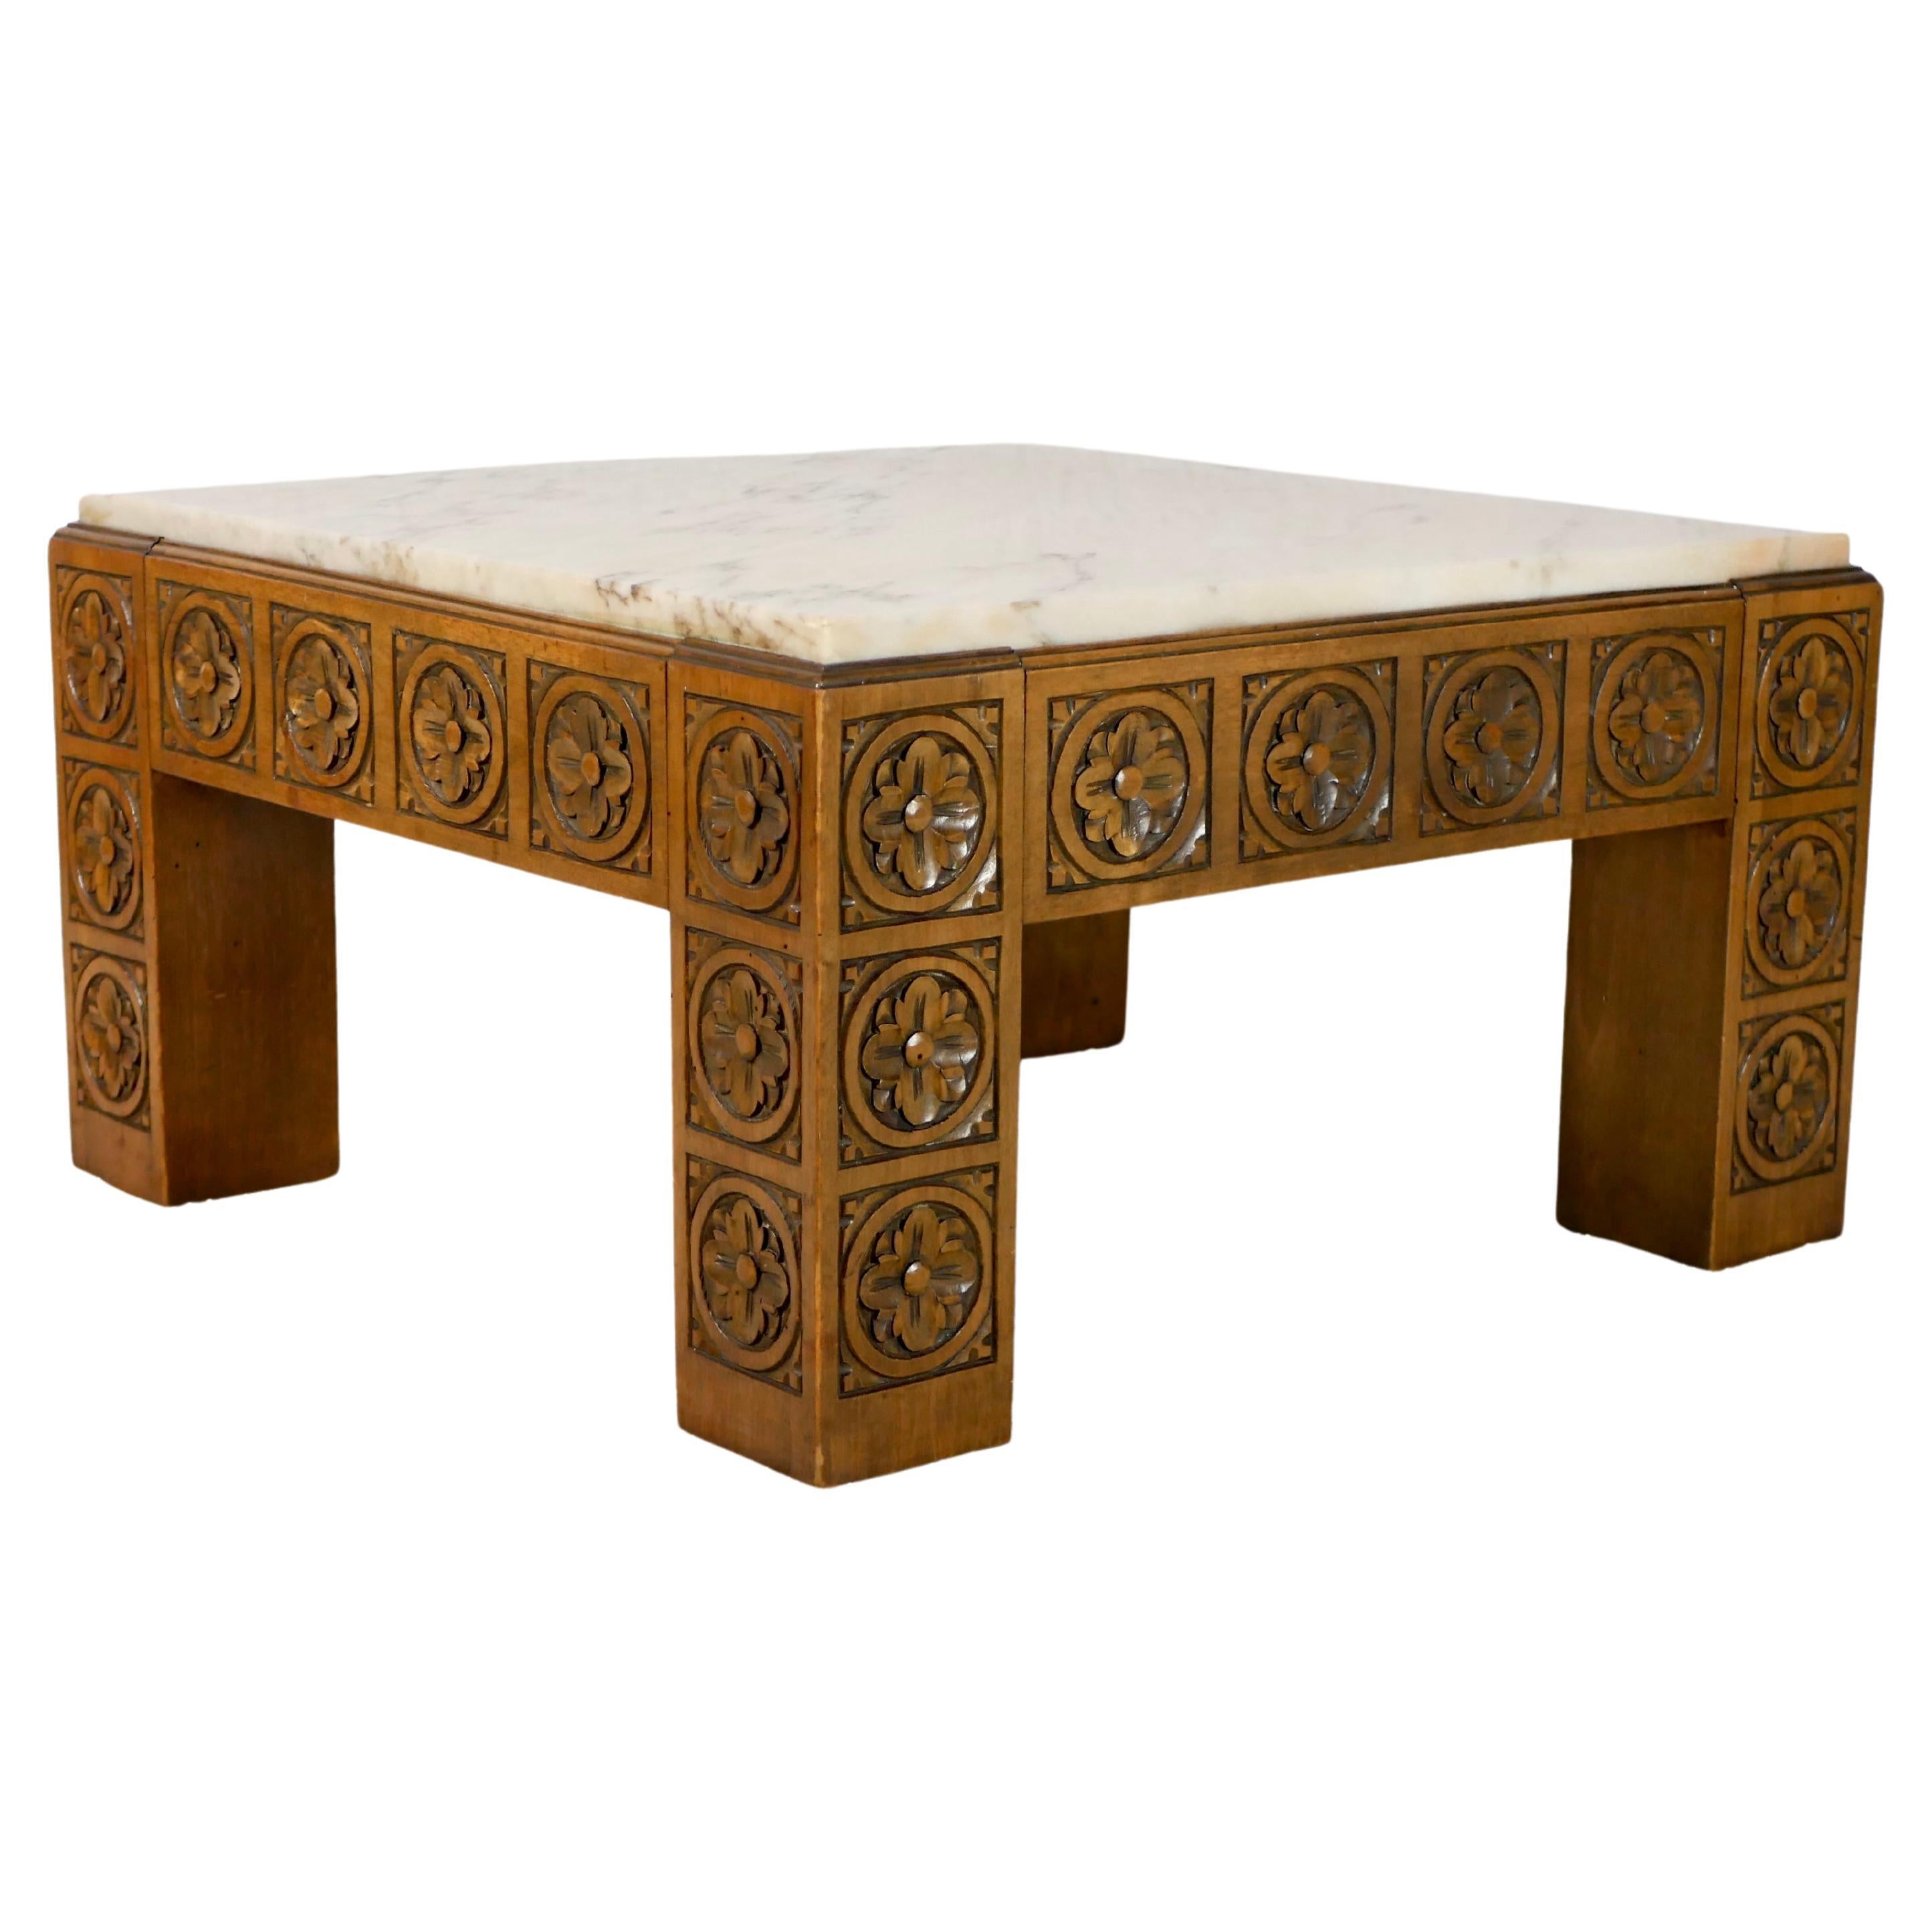 Midcentury Square Carved Wood and Marble Coffee Table from Spain